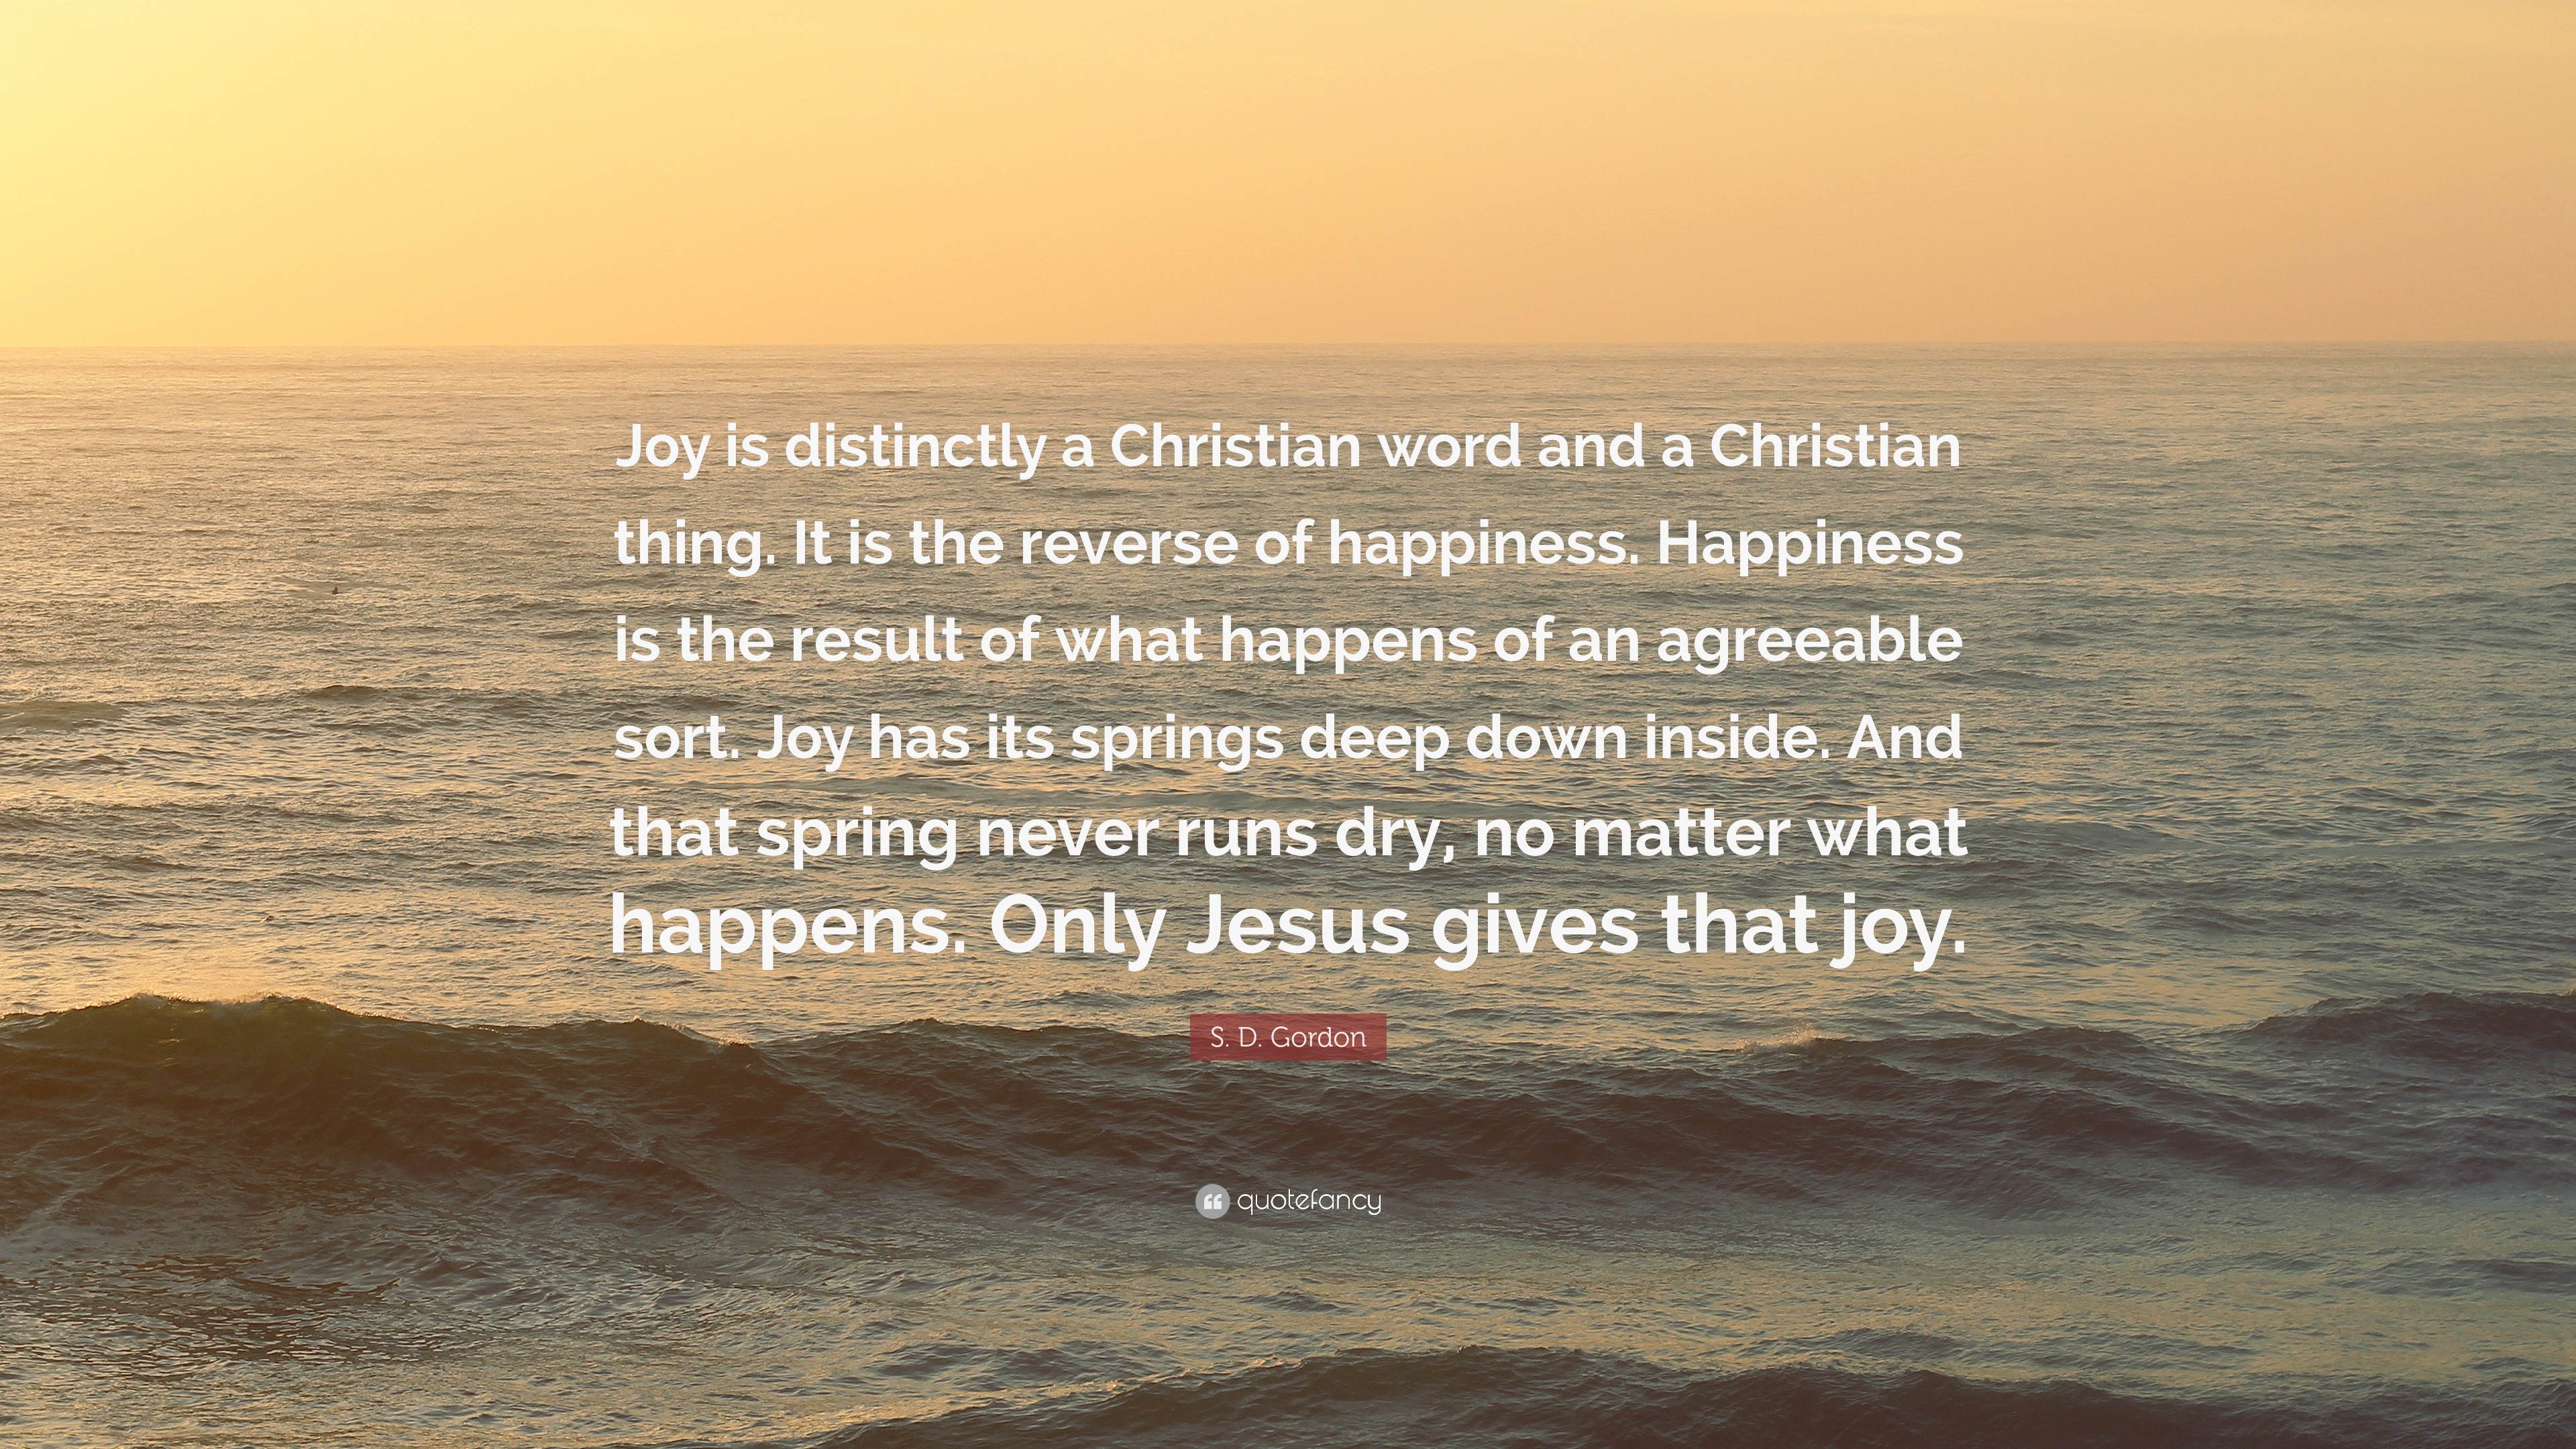 S. D. Gordon Quote “Joy is distinctly a Christian word and a Christian